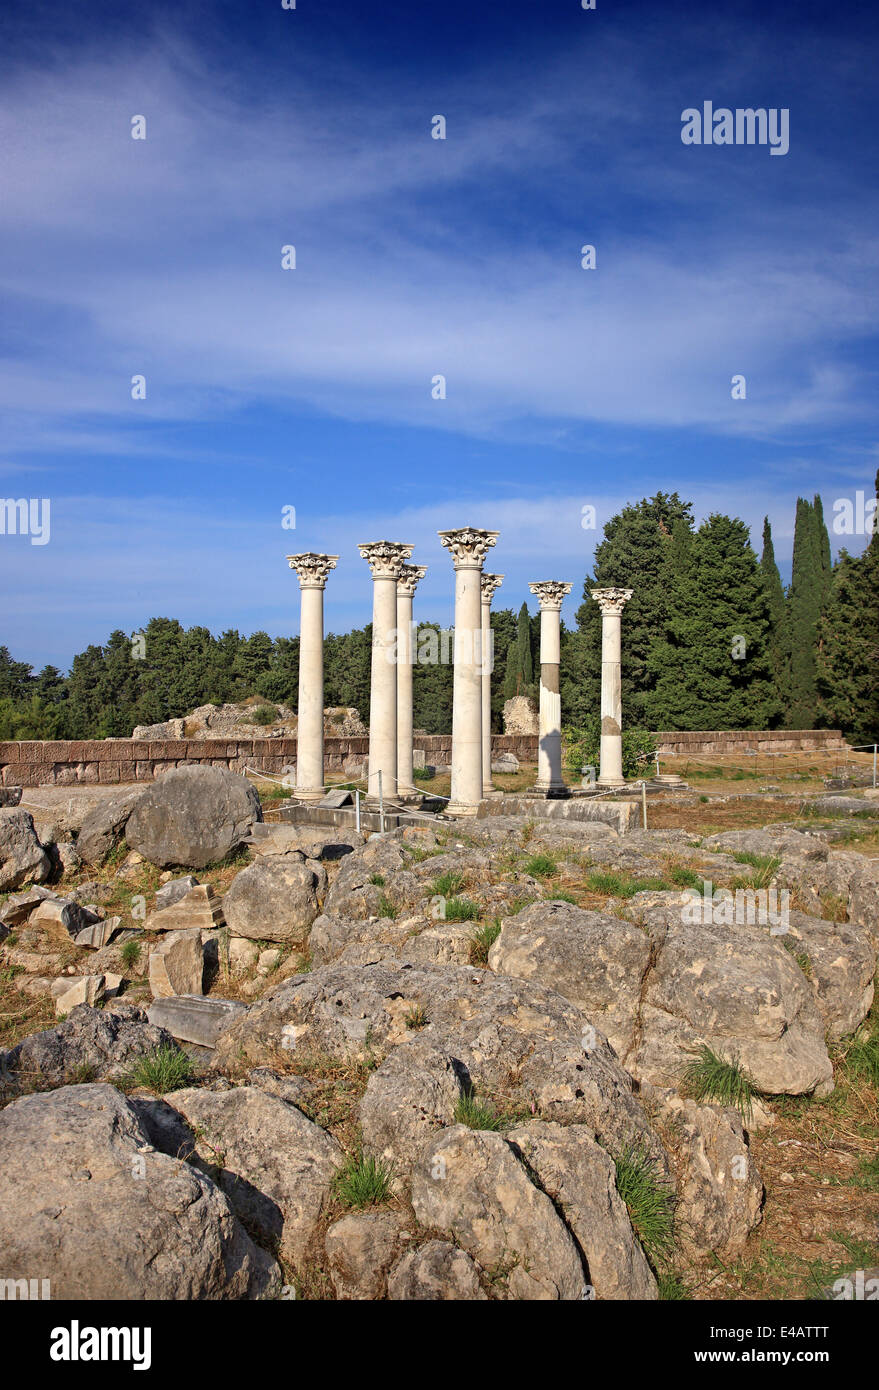 Roman temple at the archaeological site of the Asklepieion, Kos island, Dodecanese, Aegean sea, Greece. Stock Photo